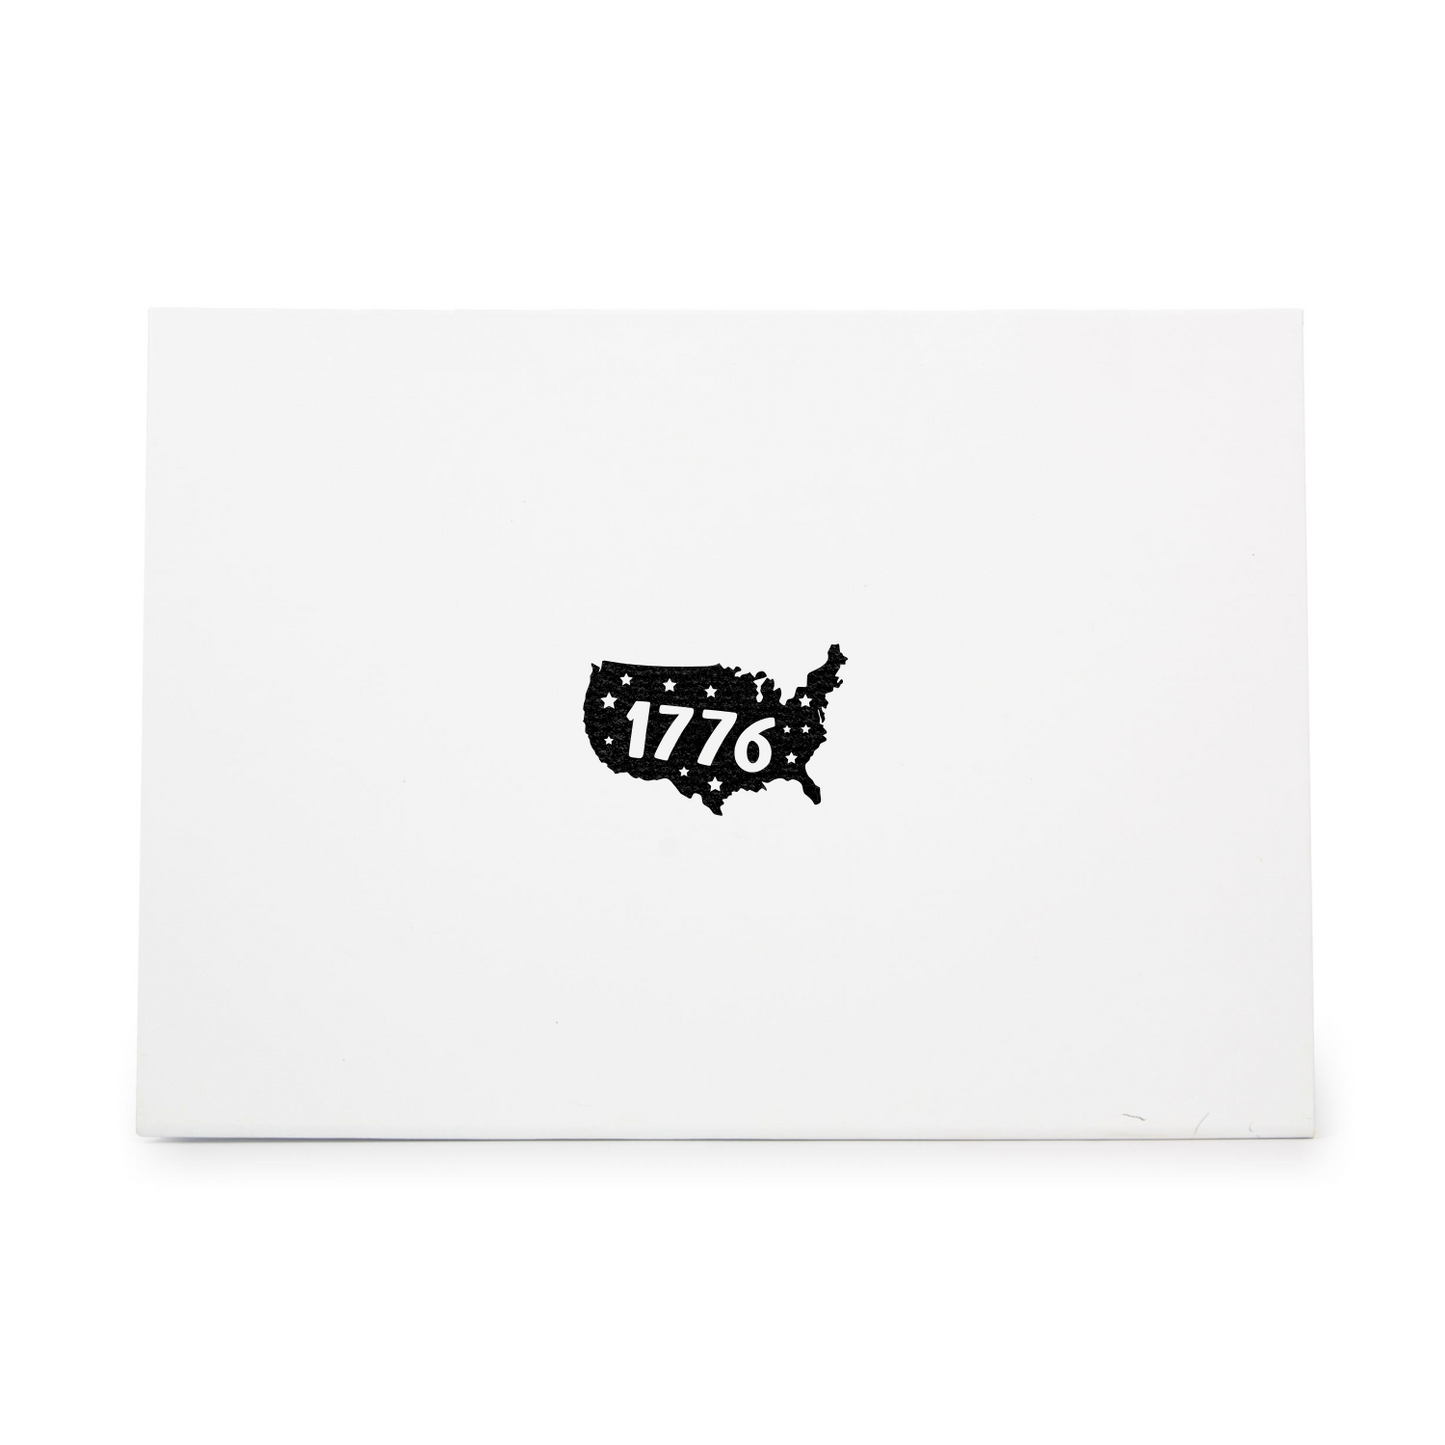 A Map Of The United States With The Year 1776 Rubber Stamp CCSTA-5878